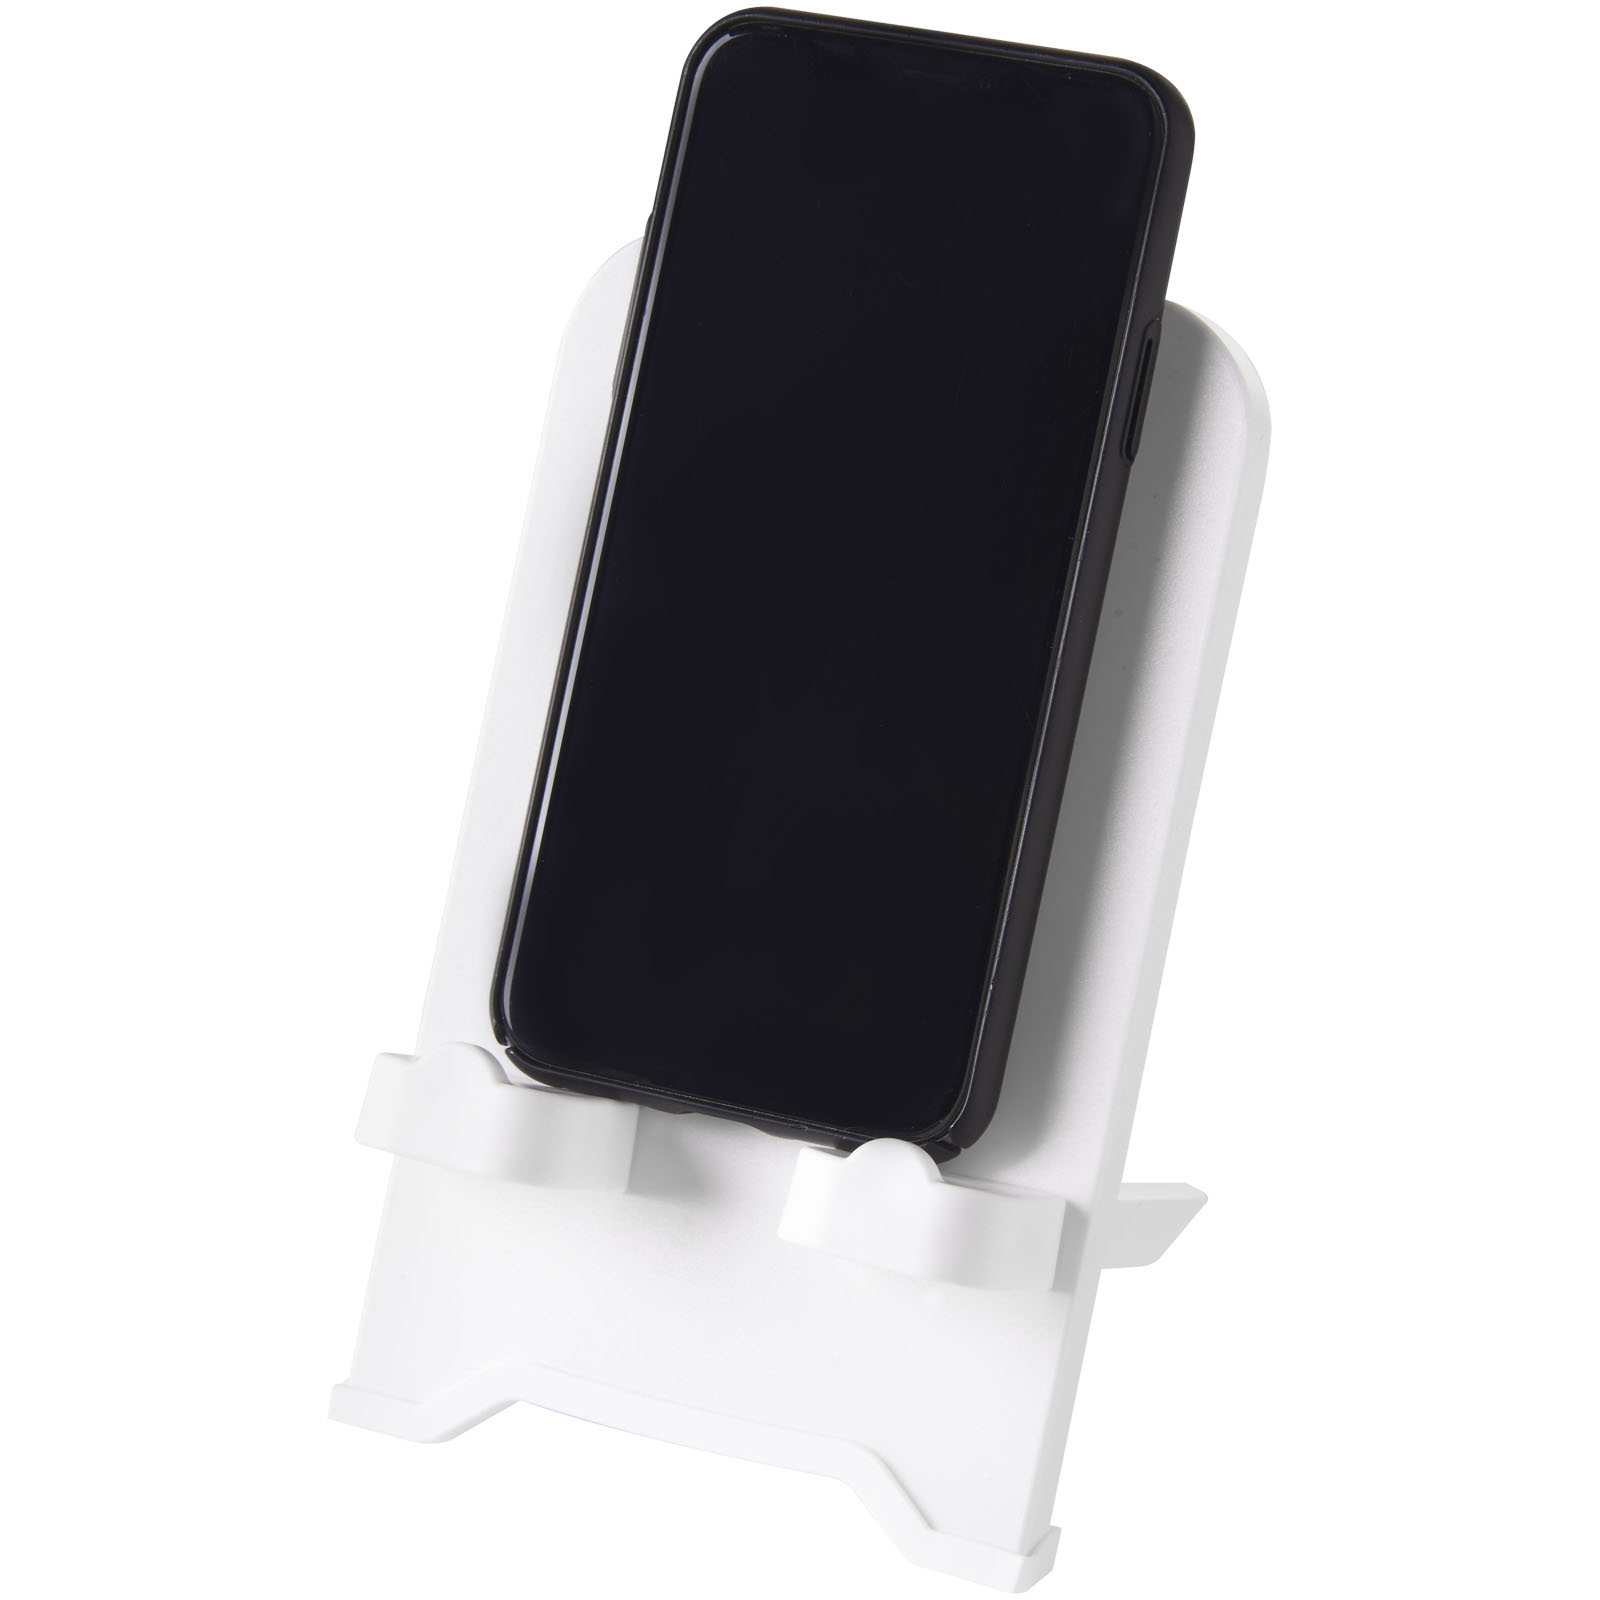 Advertising Stands & Holders - The Dok phone stand - 3